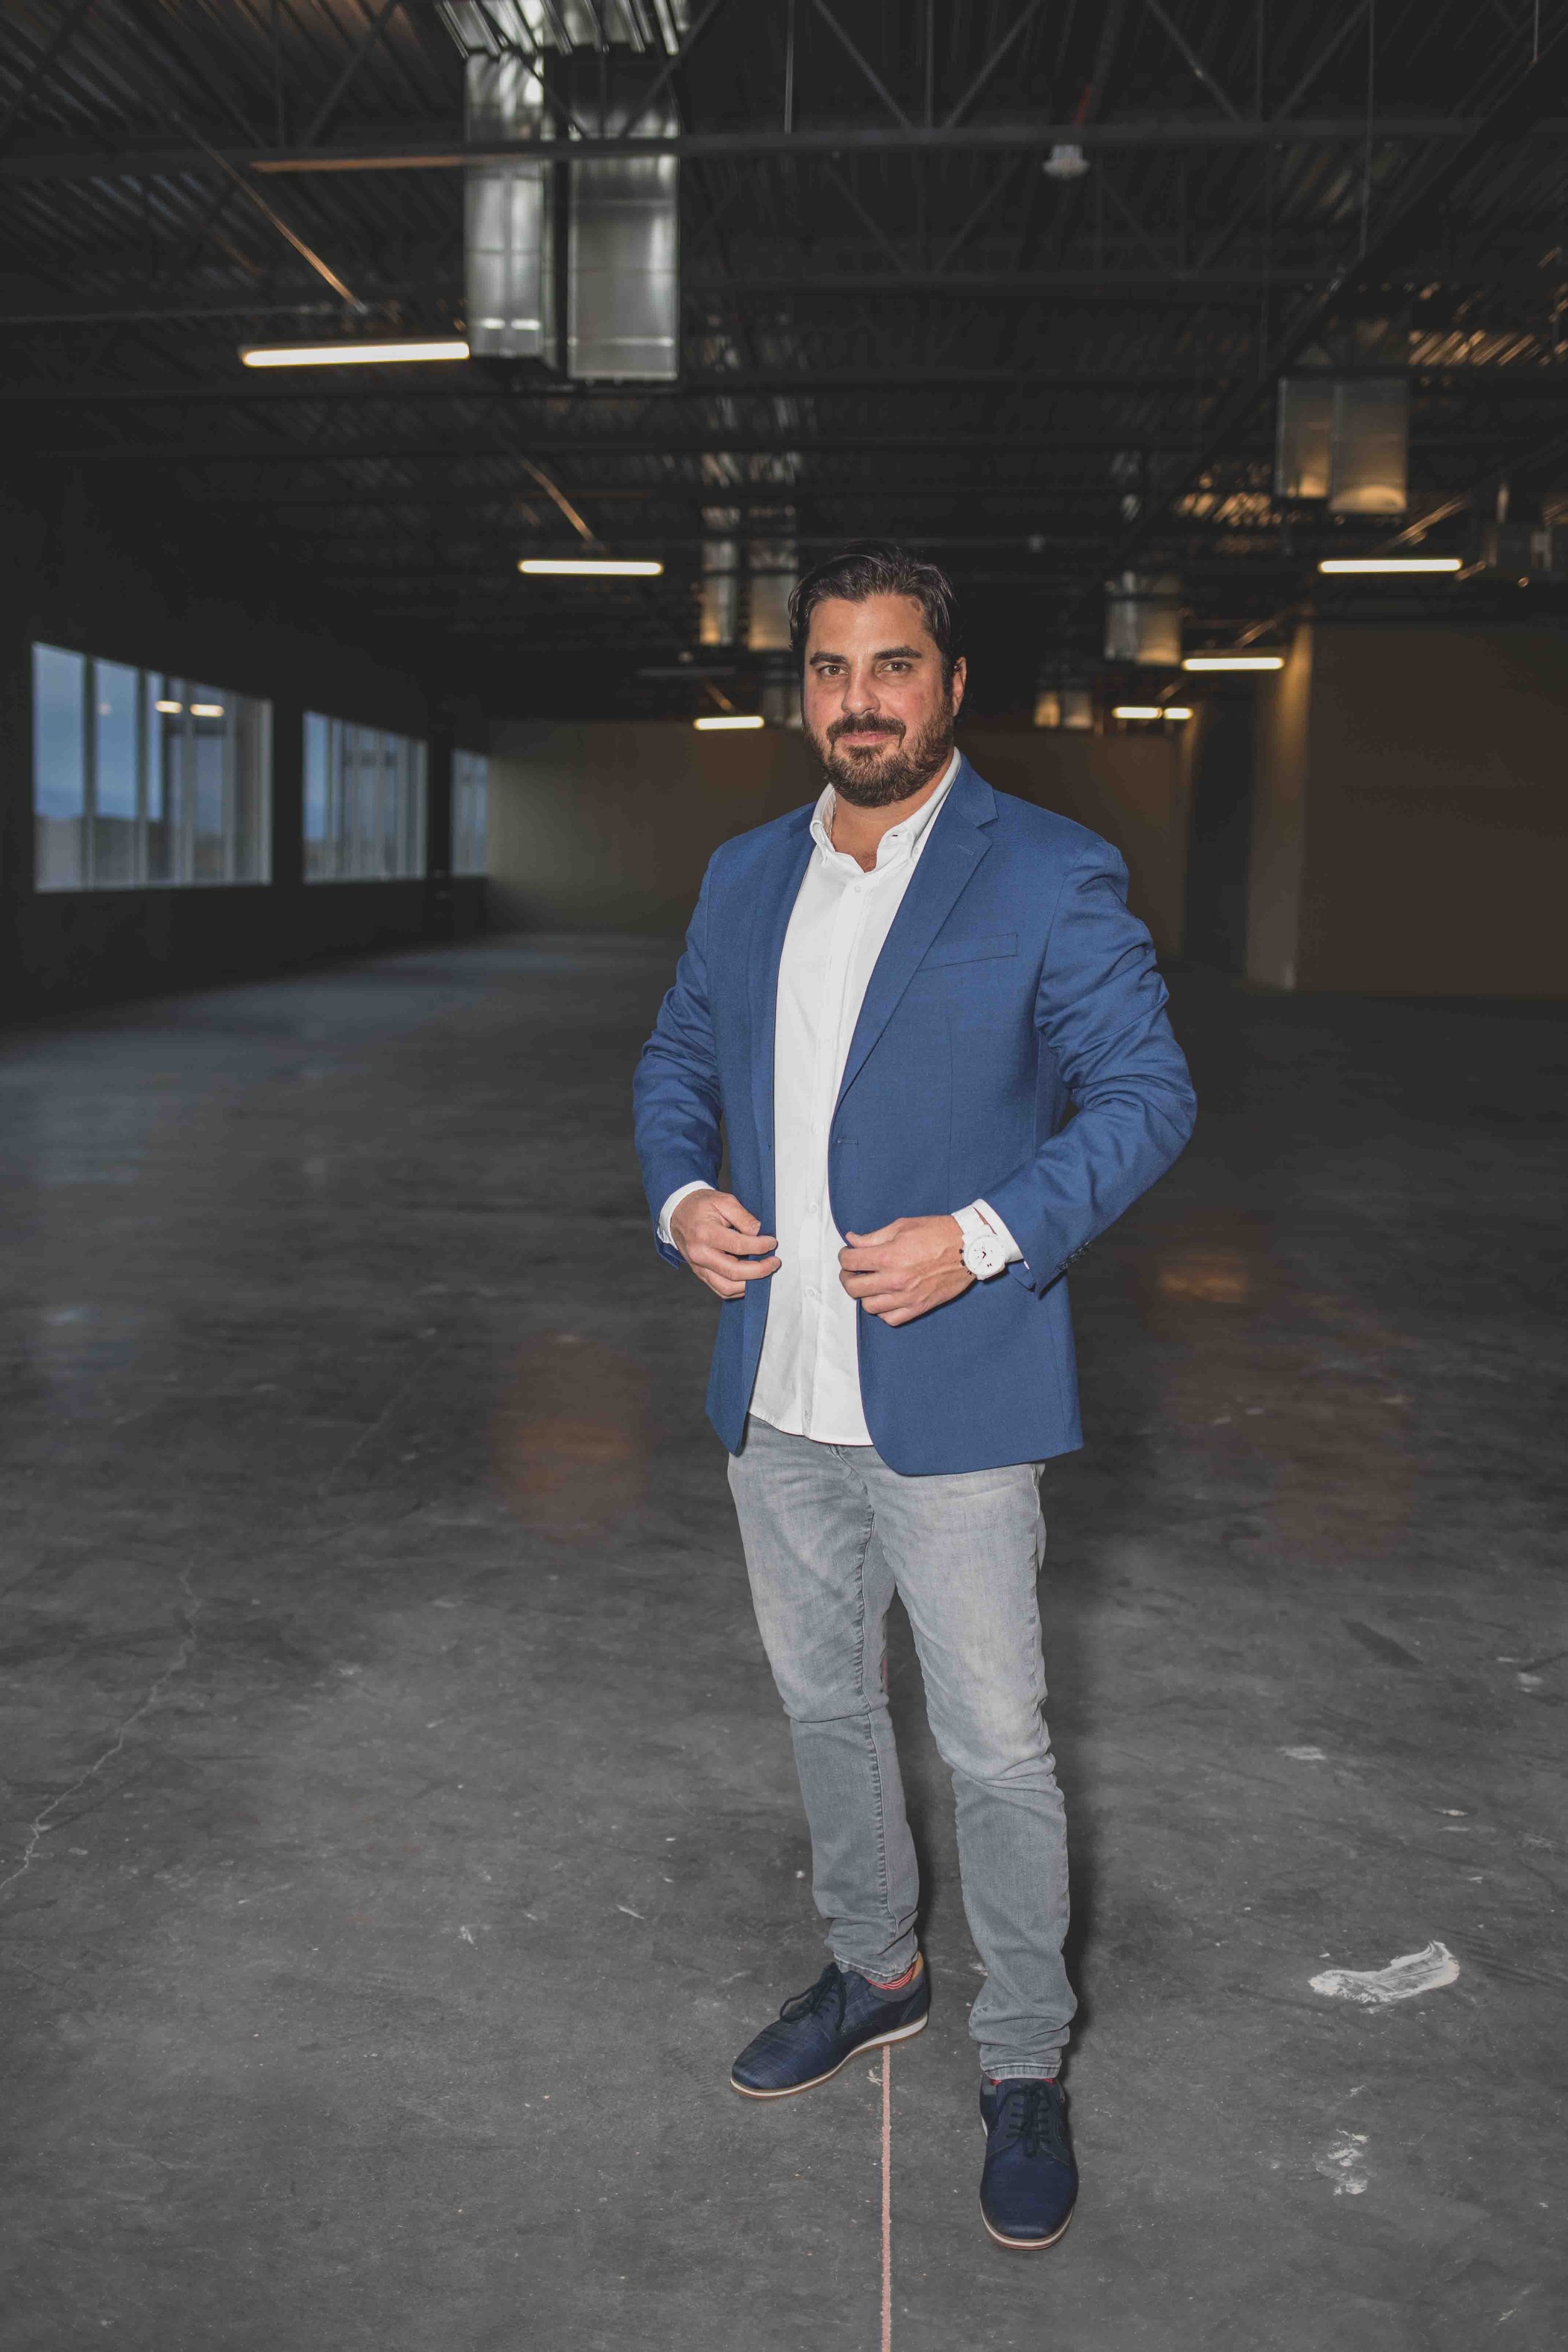 Man poses in vacant office construction site for professional headshots by best branding photographer in Phoenix, Arizona; Jennifer Lind Schutsky.